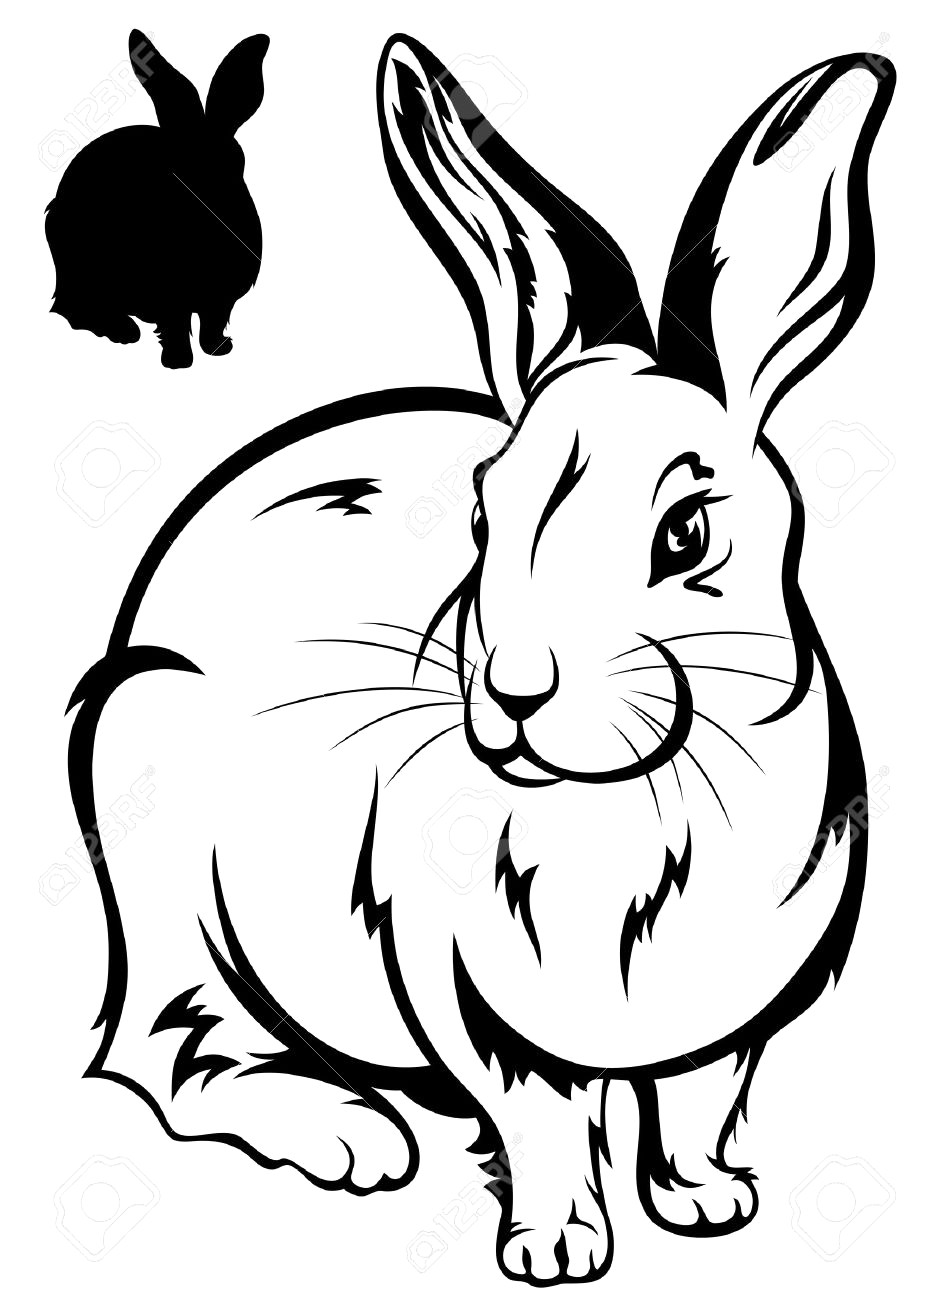 Download Rabbit Outline Sketch at PaintingValley.com | Explore ...